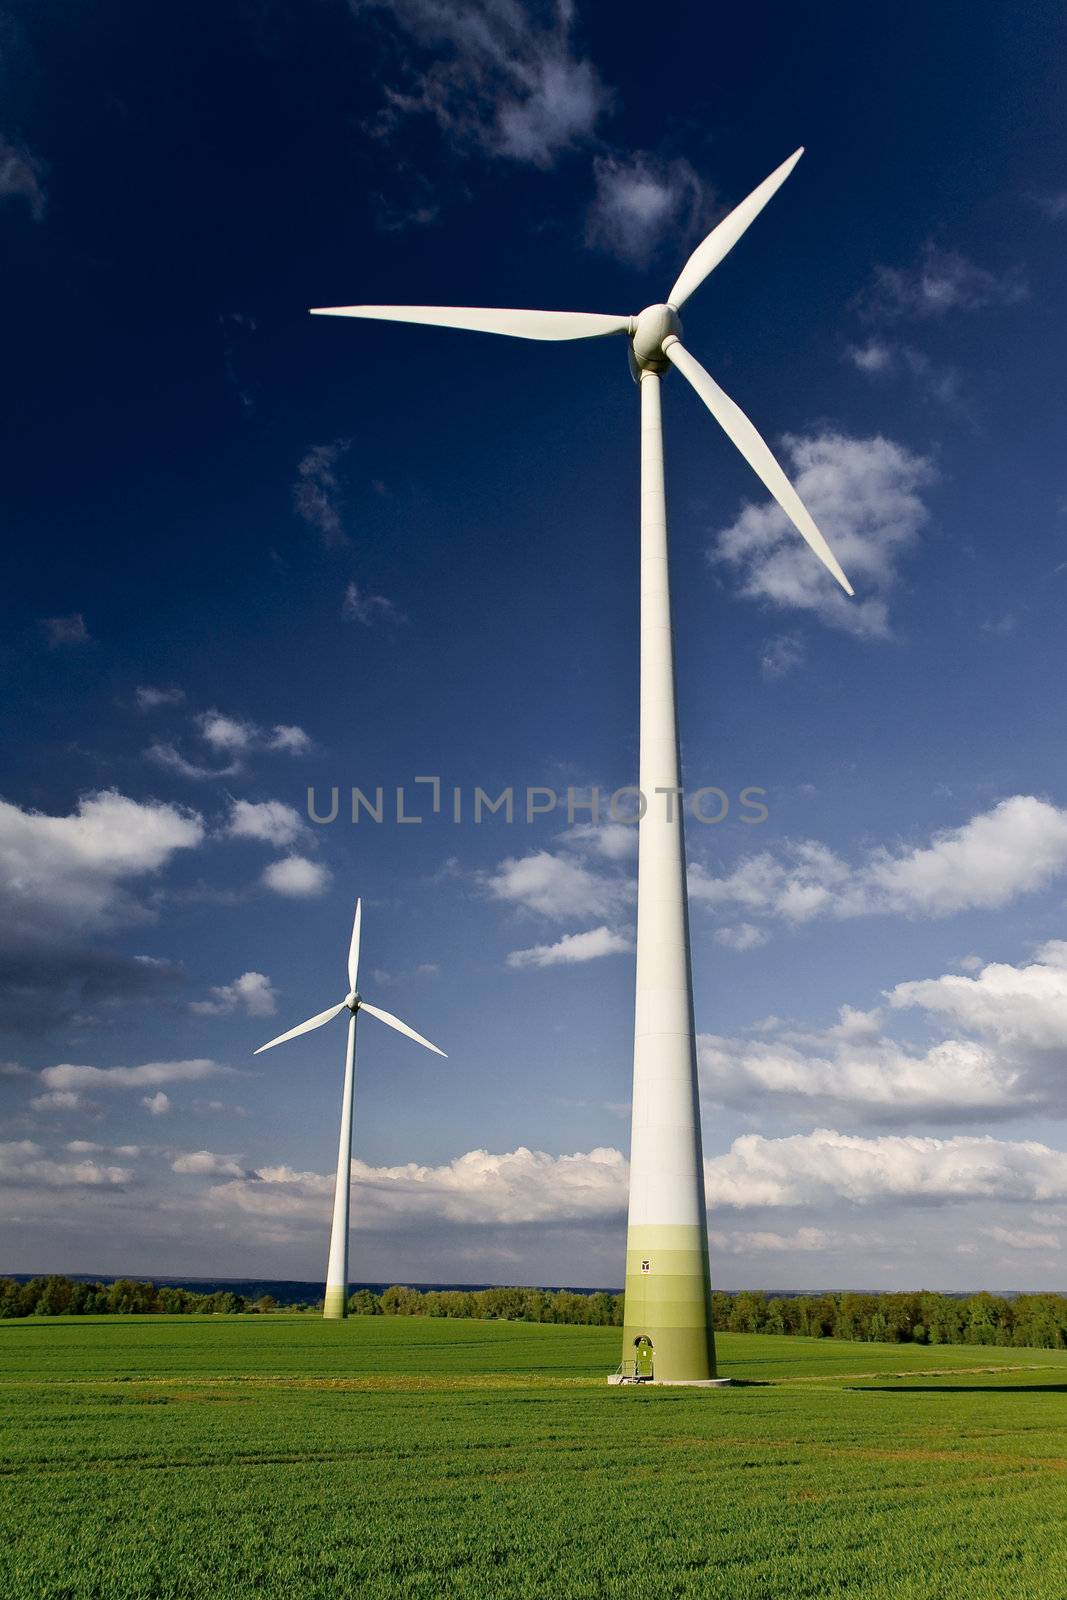 Windmills against a blue sky and clouds, alternative energy source